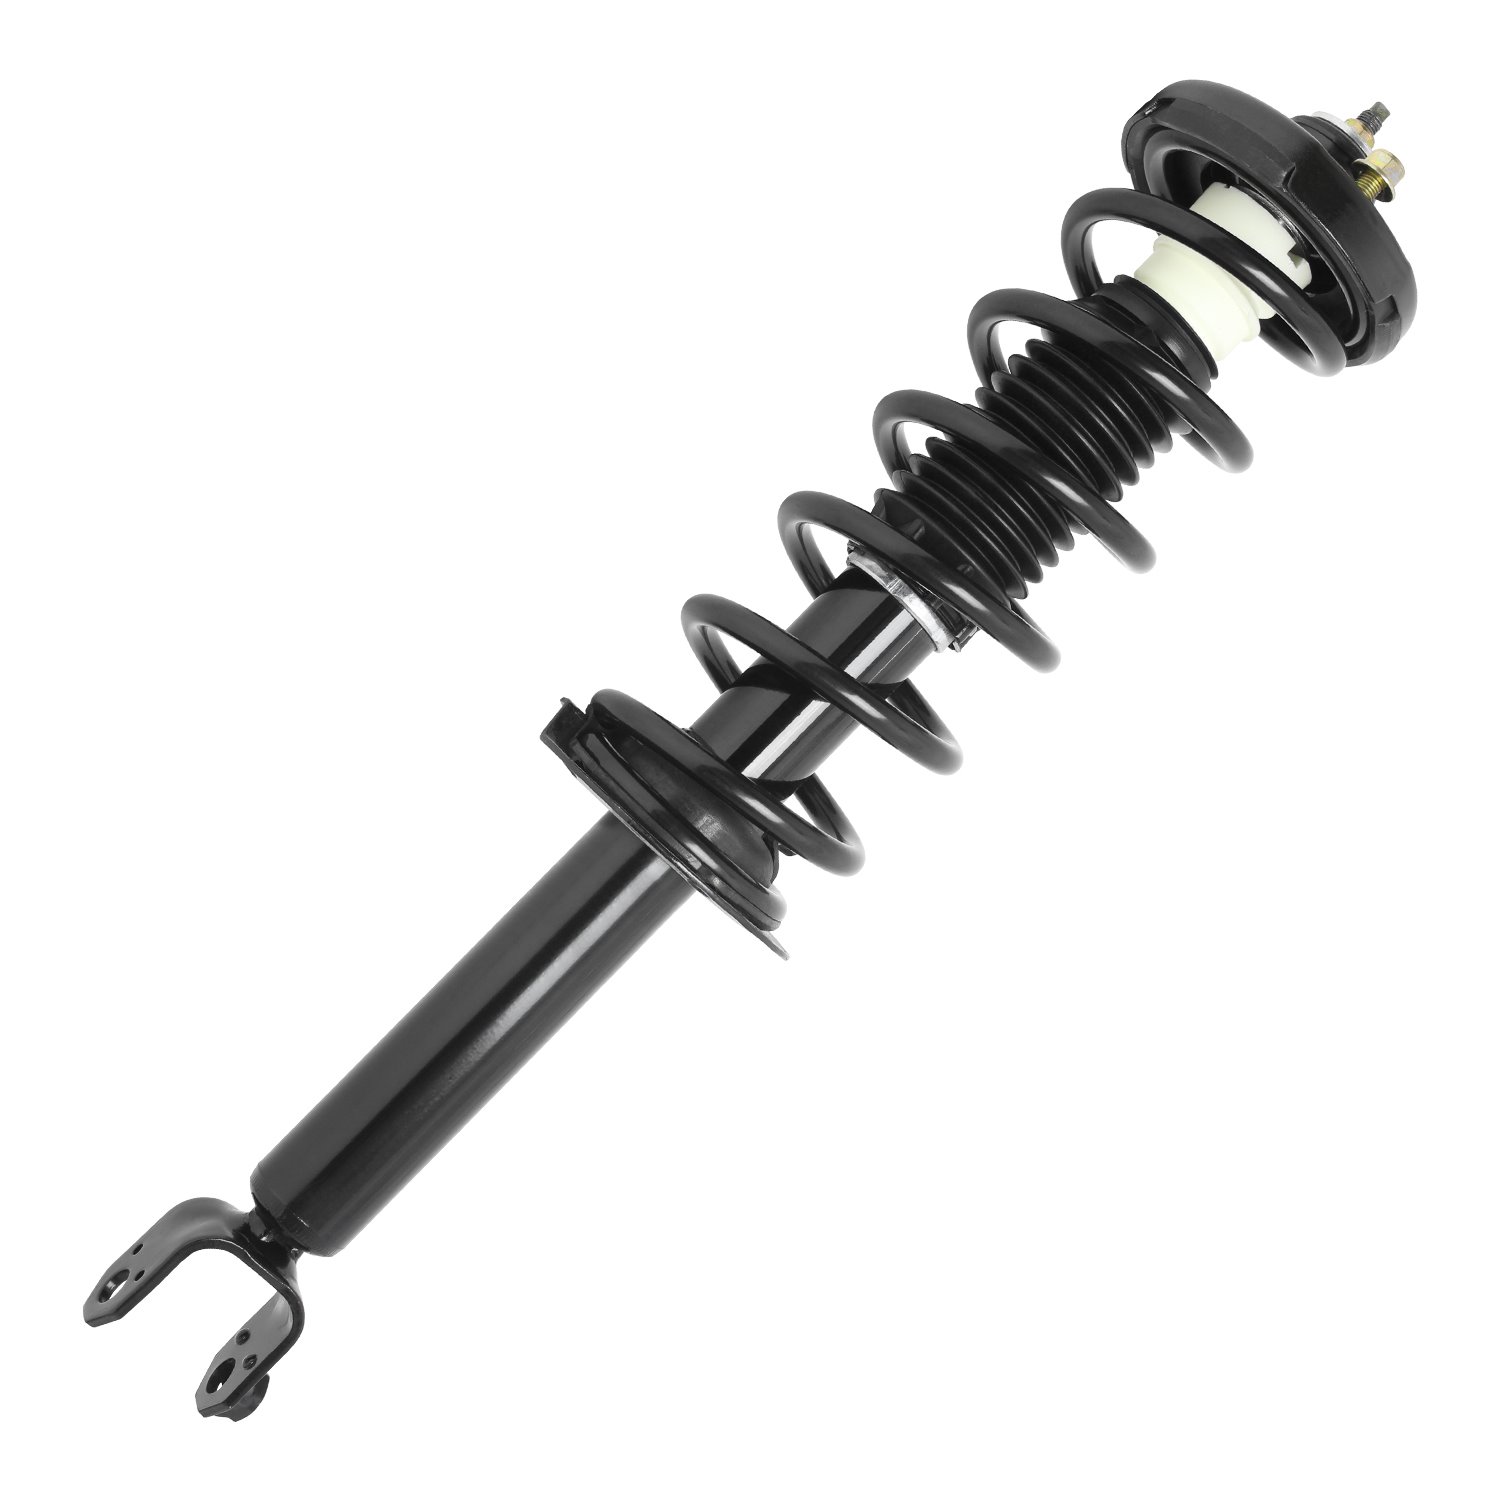 15012 Suspension Strut & Coil Spring Assembly Fits Select Acura TSX, Acura TL